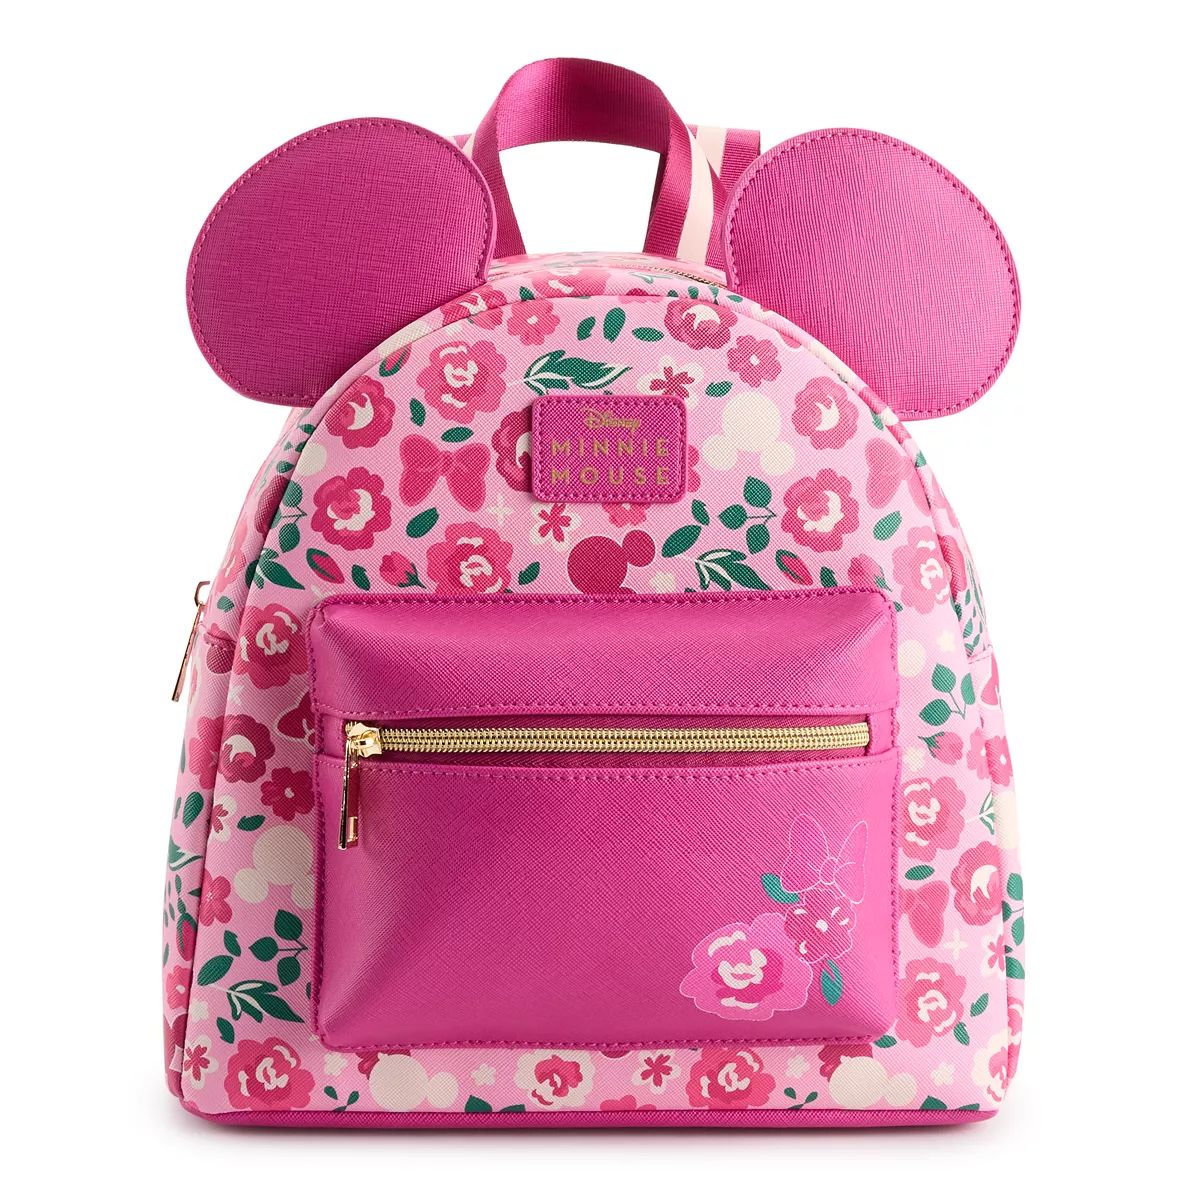 Disney's Minnie Mouse Pink Floral Print Mini Backpack | Kohl's